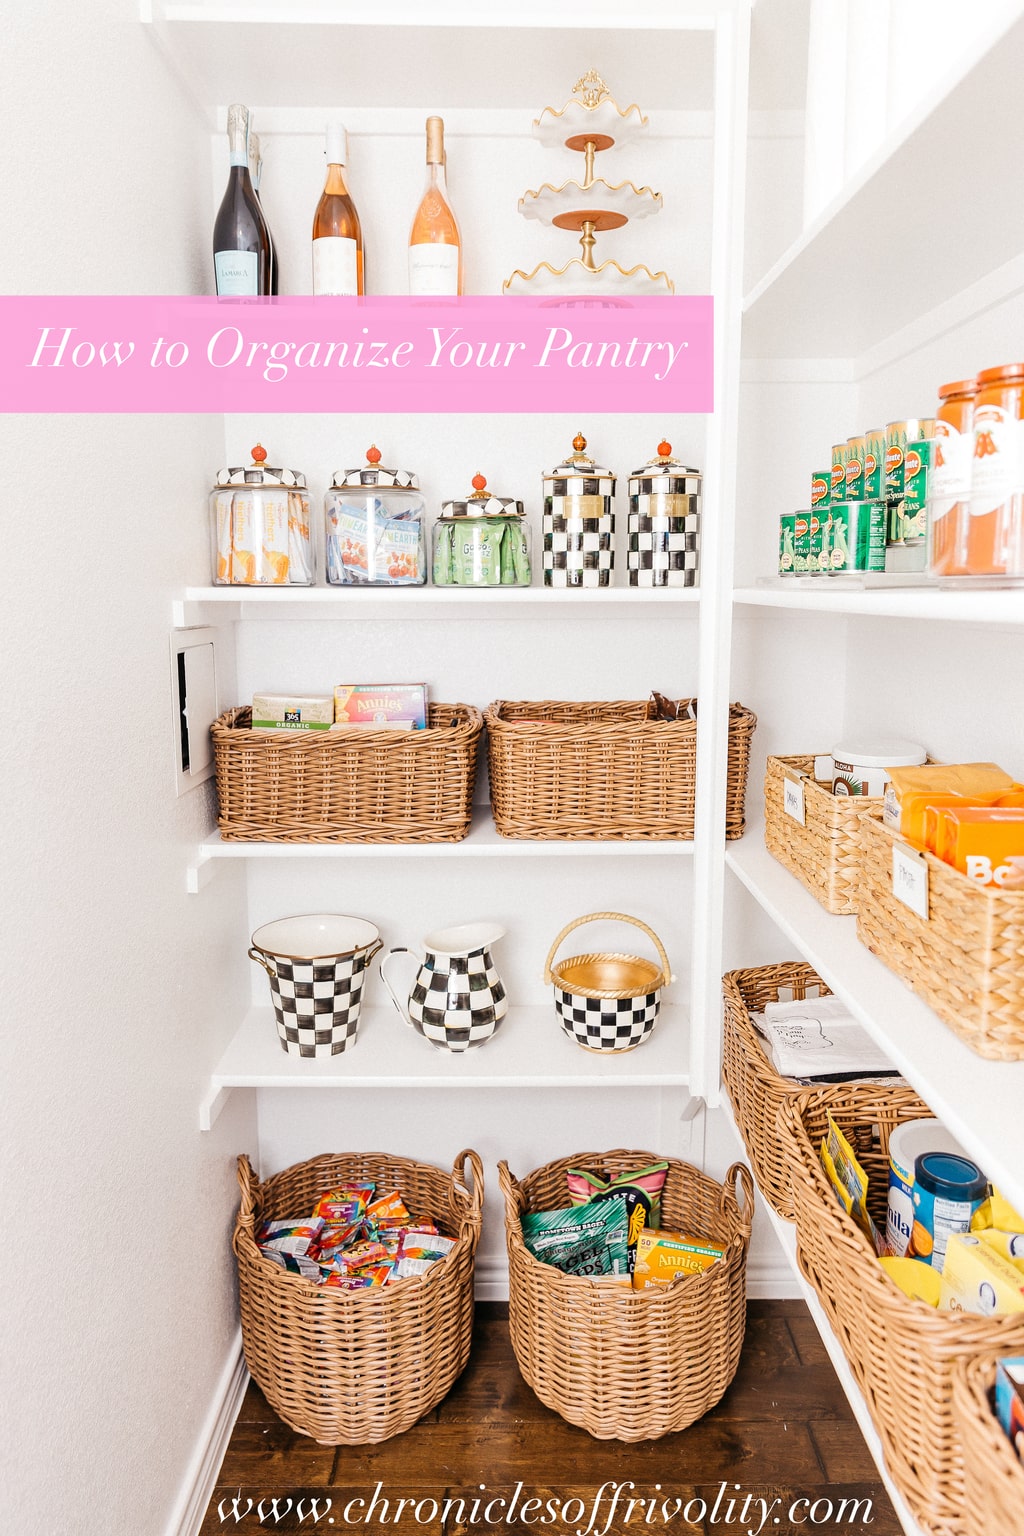 Pantry Xo Cereal Containers Design Ideas